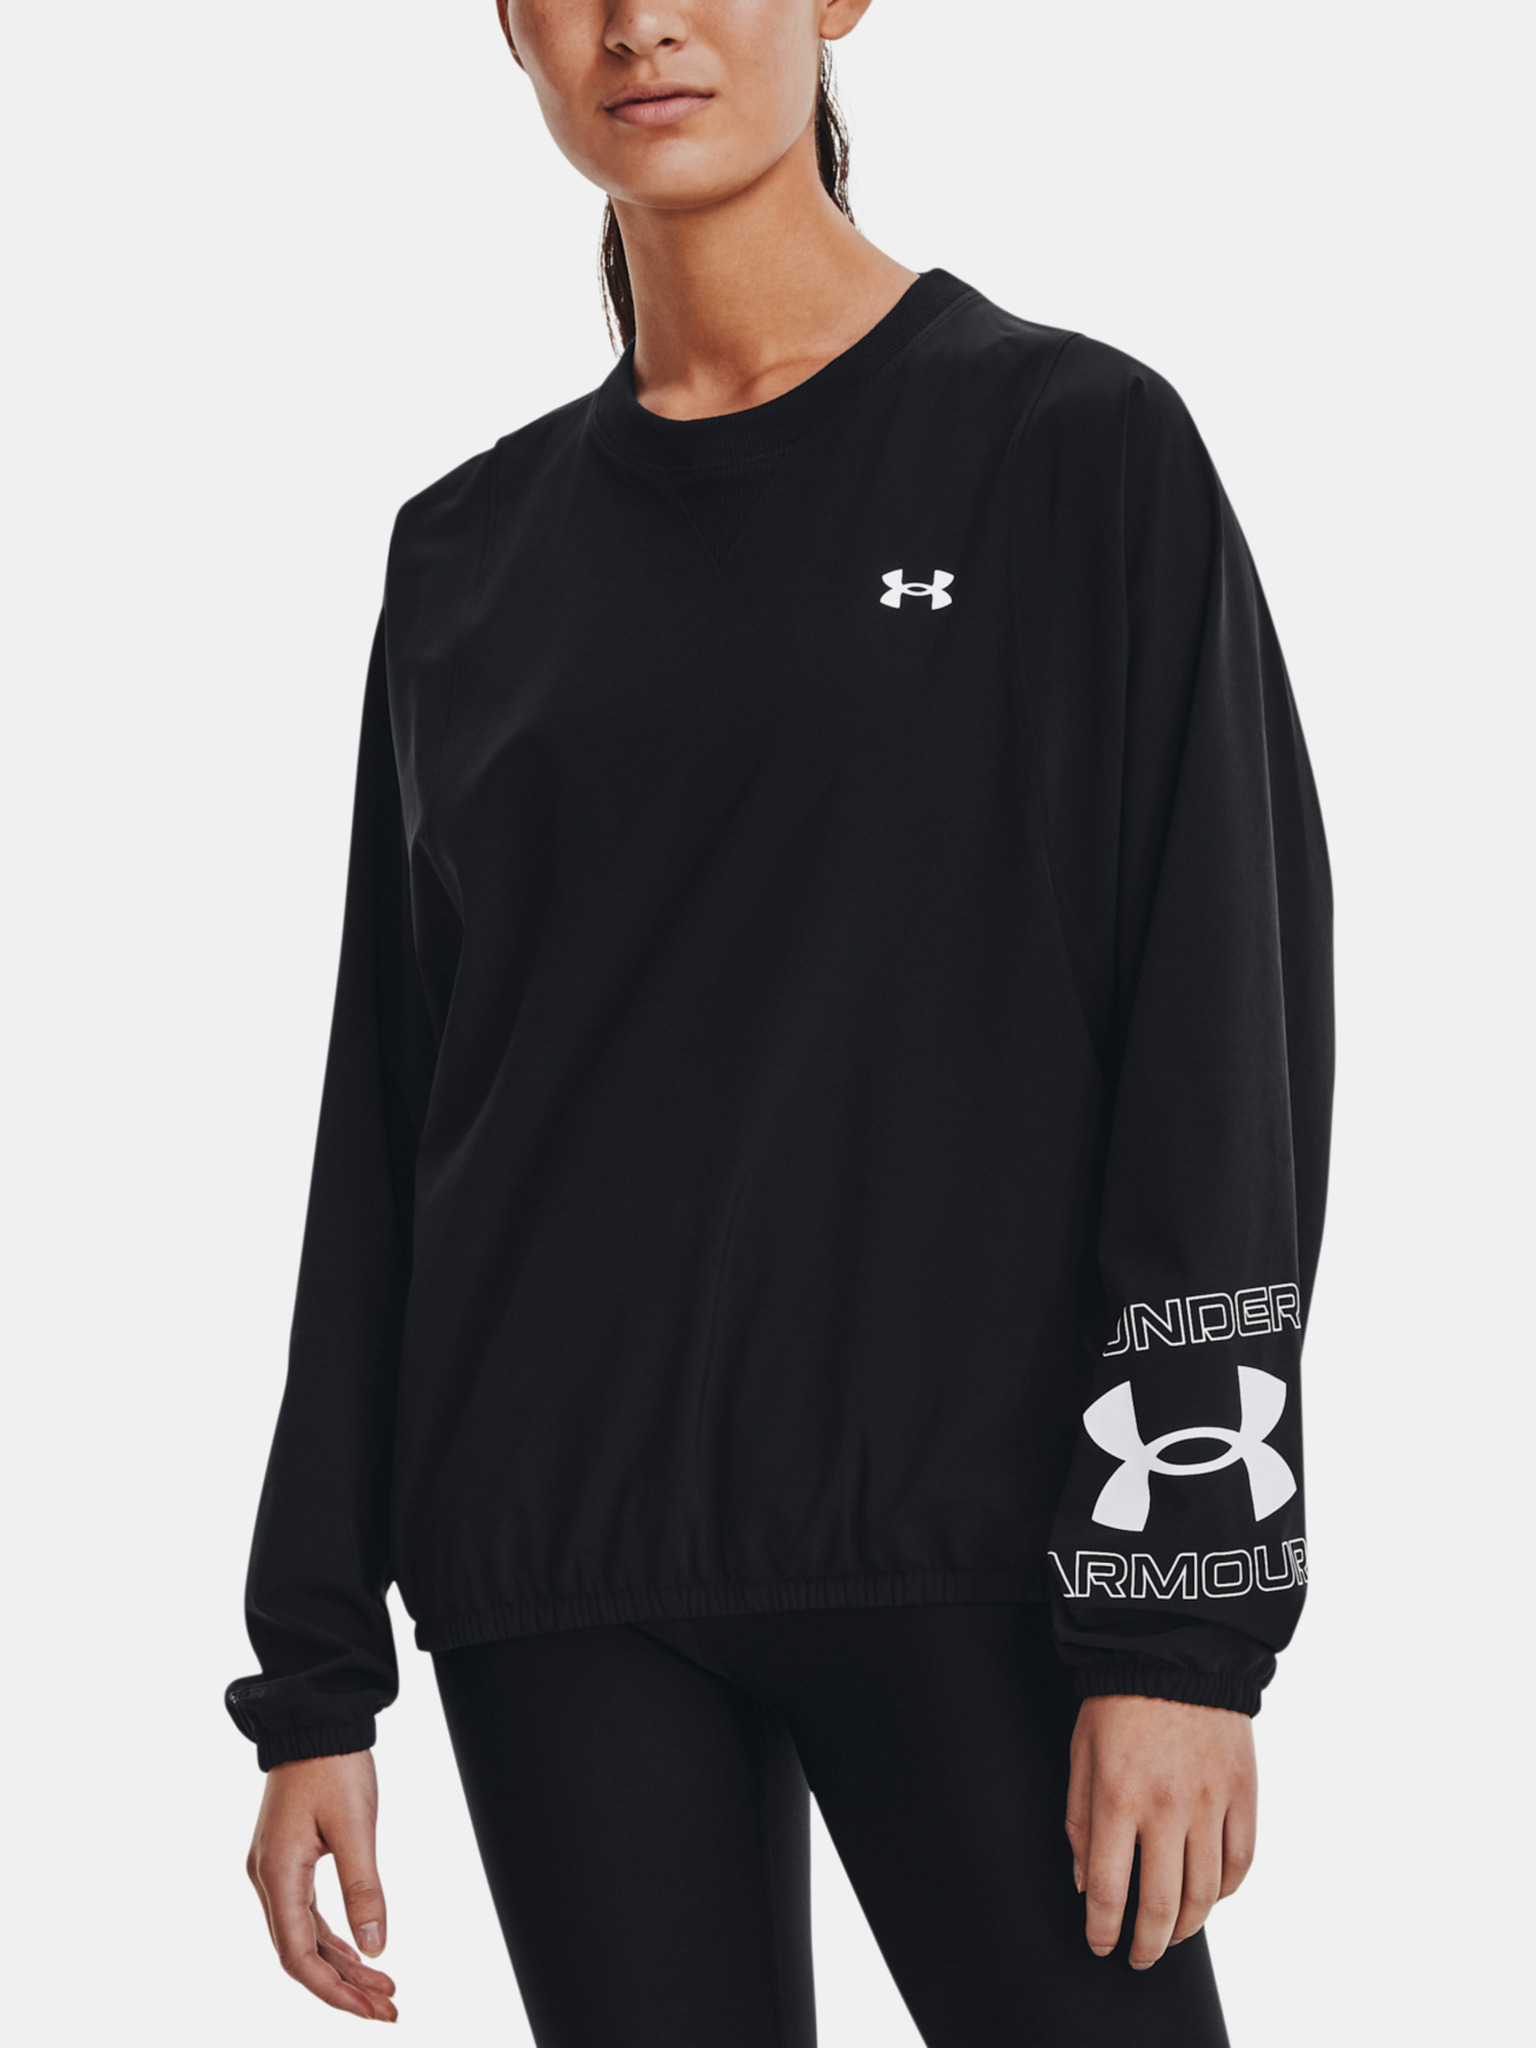 Woven Graphic Crew Mikina Under Armour